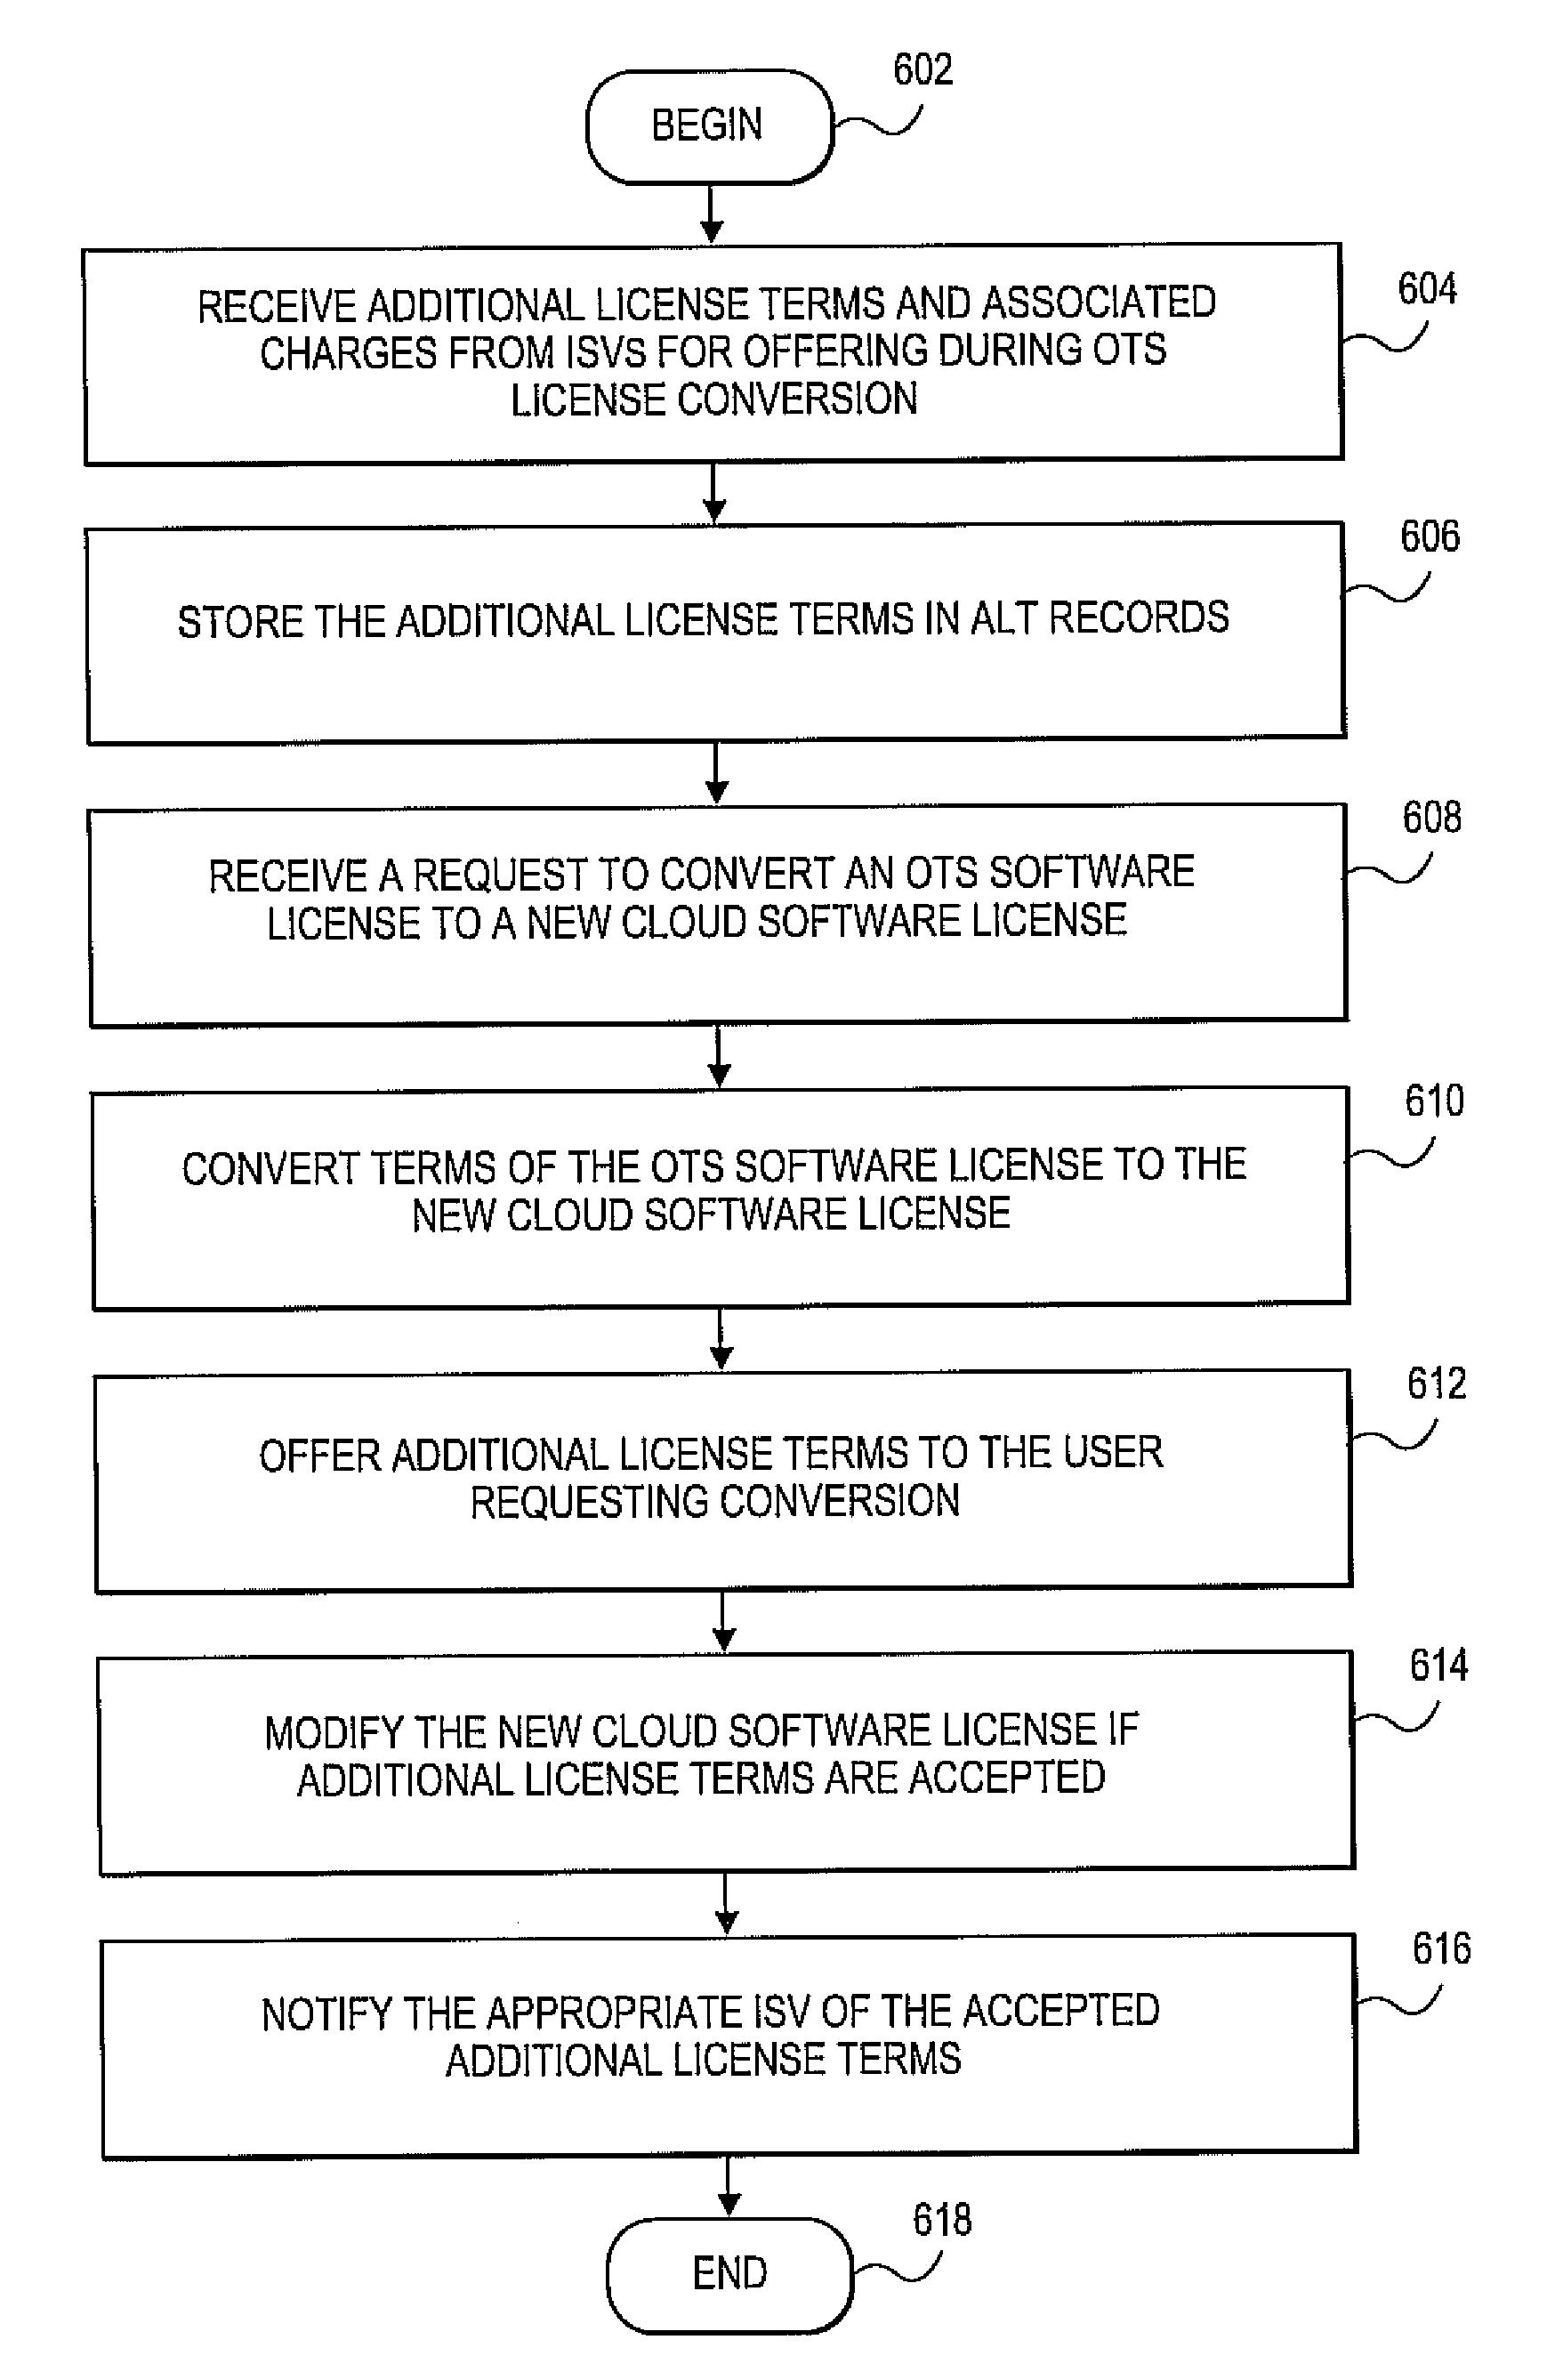 Methods and systems for offering additional license terms during conversion of standard software licenses for use in cloud computing environments